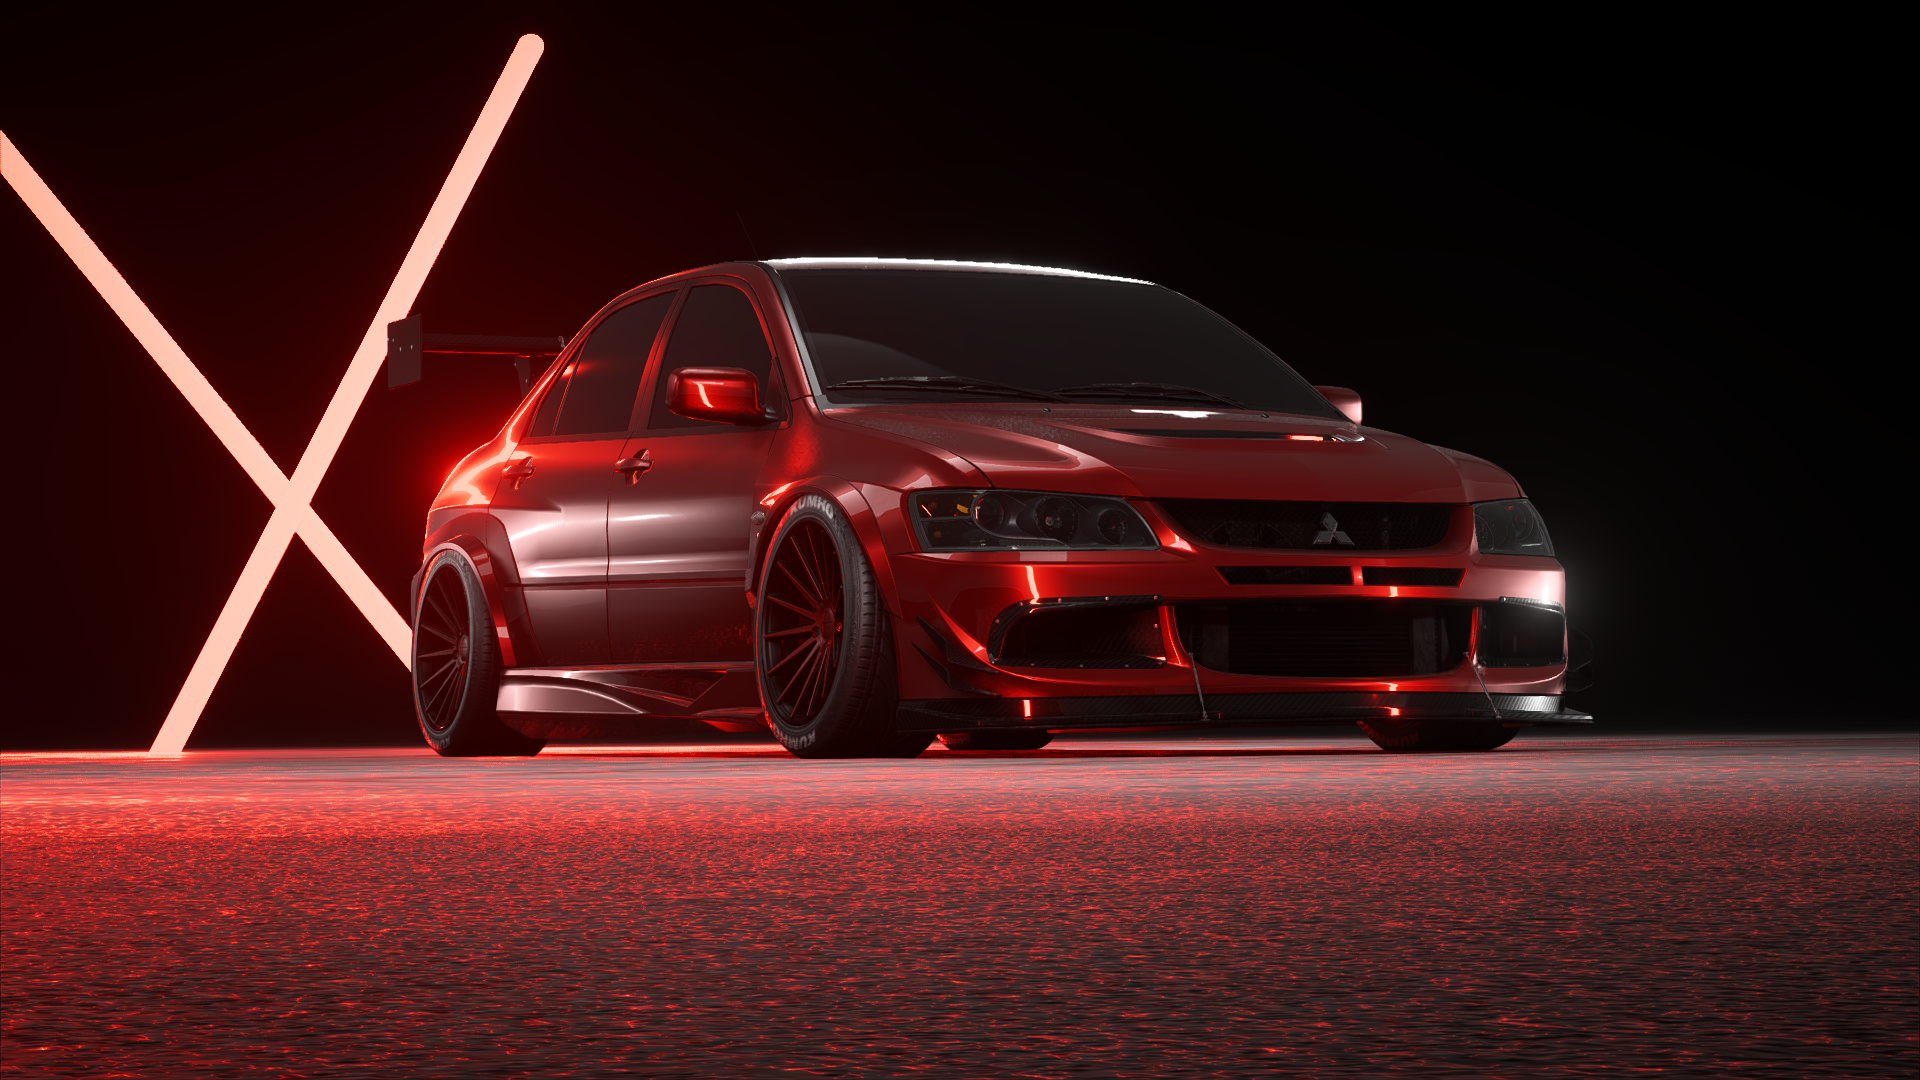 General 1920x1080 Mitsubishi Lancer Evo X red Need for Speed car Need for Speed Payback red cars vehicle worm's eye view Japanese cars Sedan video games bodykit